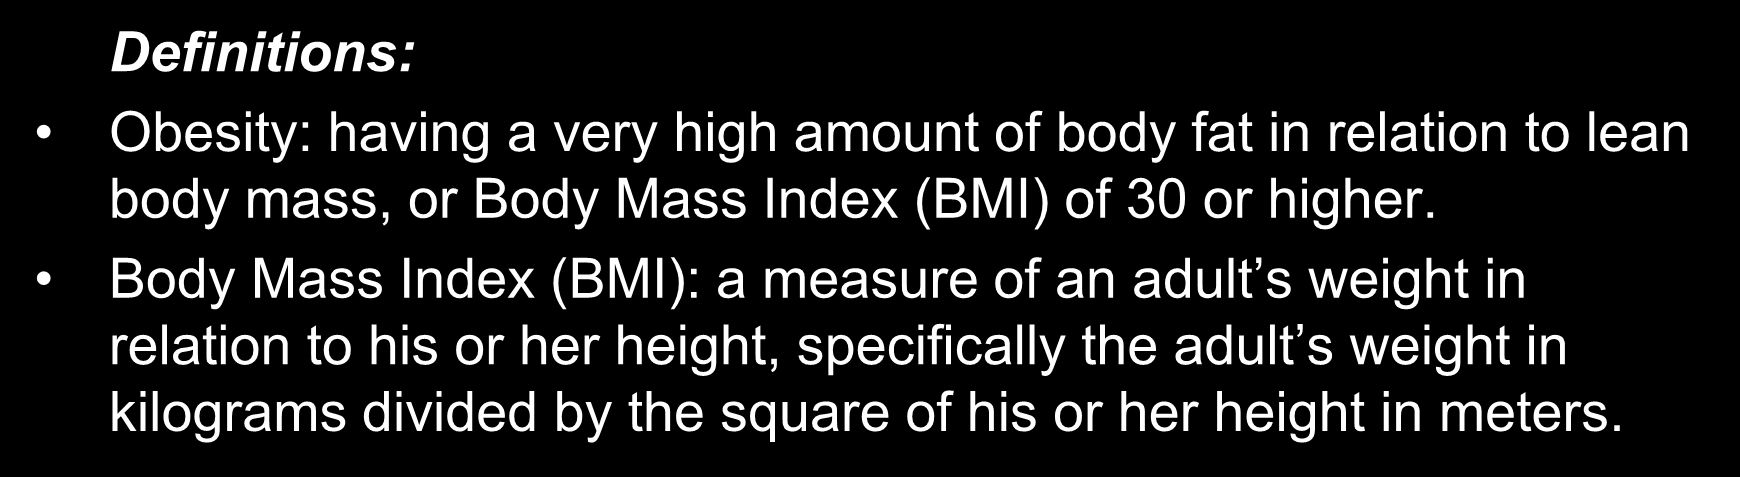 Obesity Trends Among U.S. Adults between 1985 and 2003 Definitions: Obesity: having a very high amount of body fat in relation to lean body mass, or Body Mass Index (BMI) of 30 or higher.